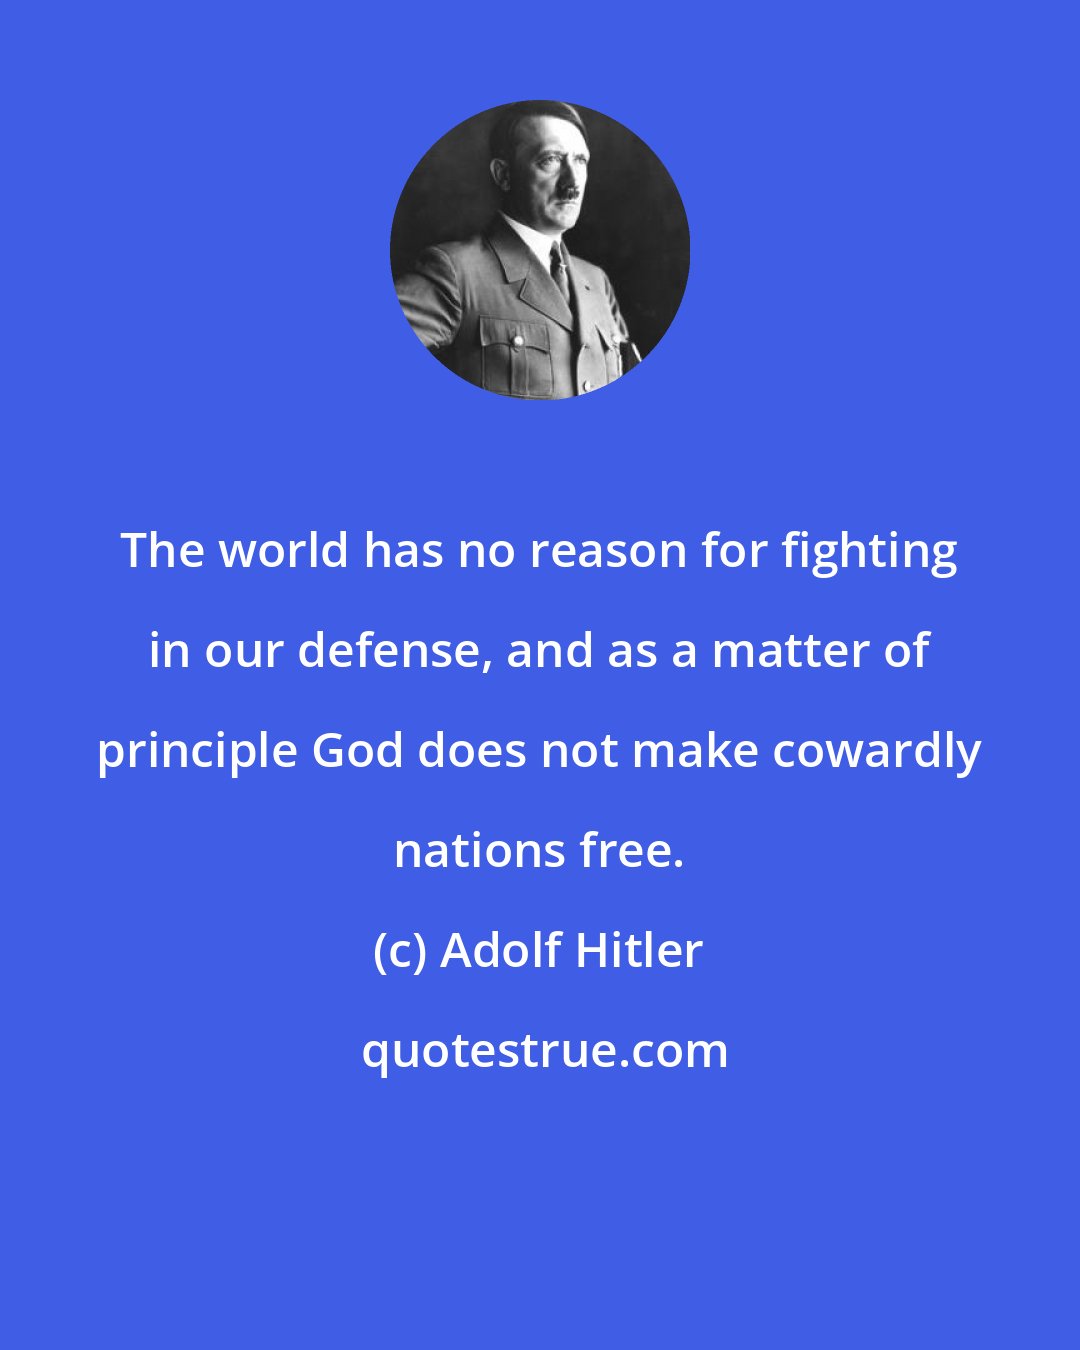 Adolf Hitler: The world has no reason for fighting in our defense, and as a matter of principle God does not make cowardly nations free.